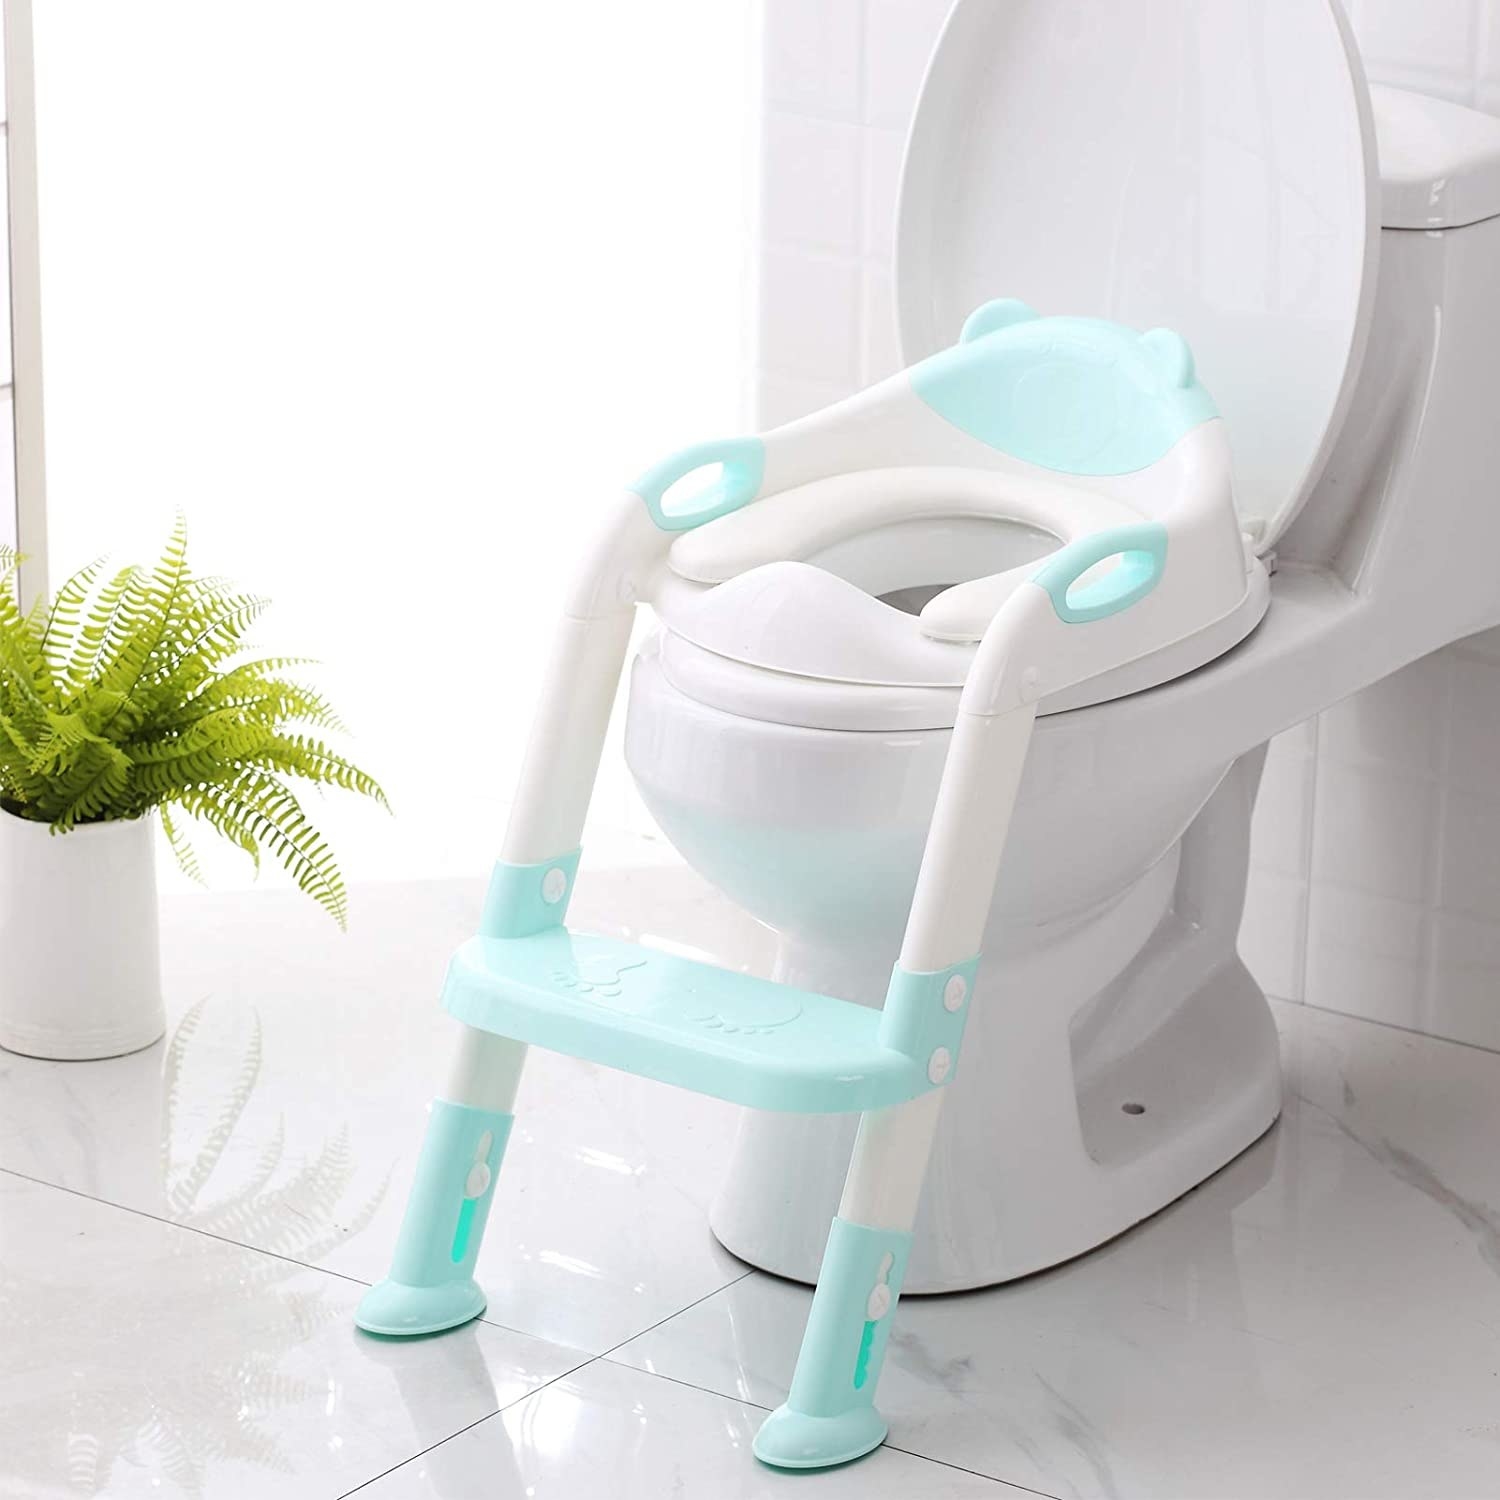 The white and teal potty seat with ladder resting on a toilet